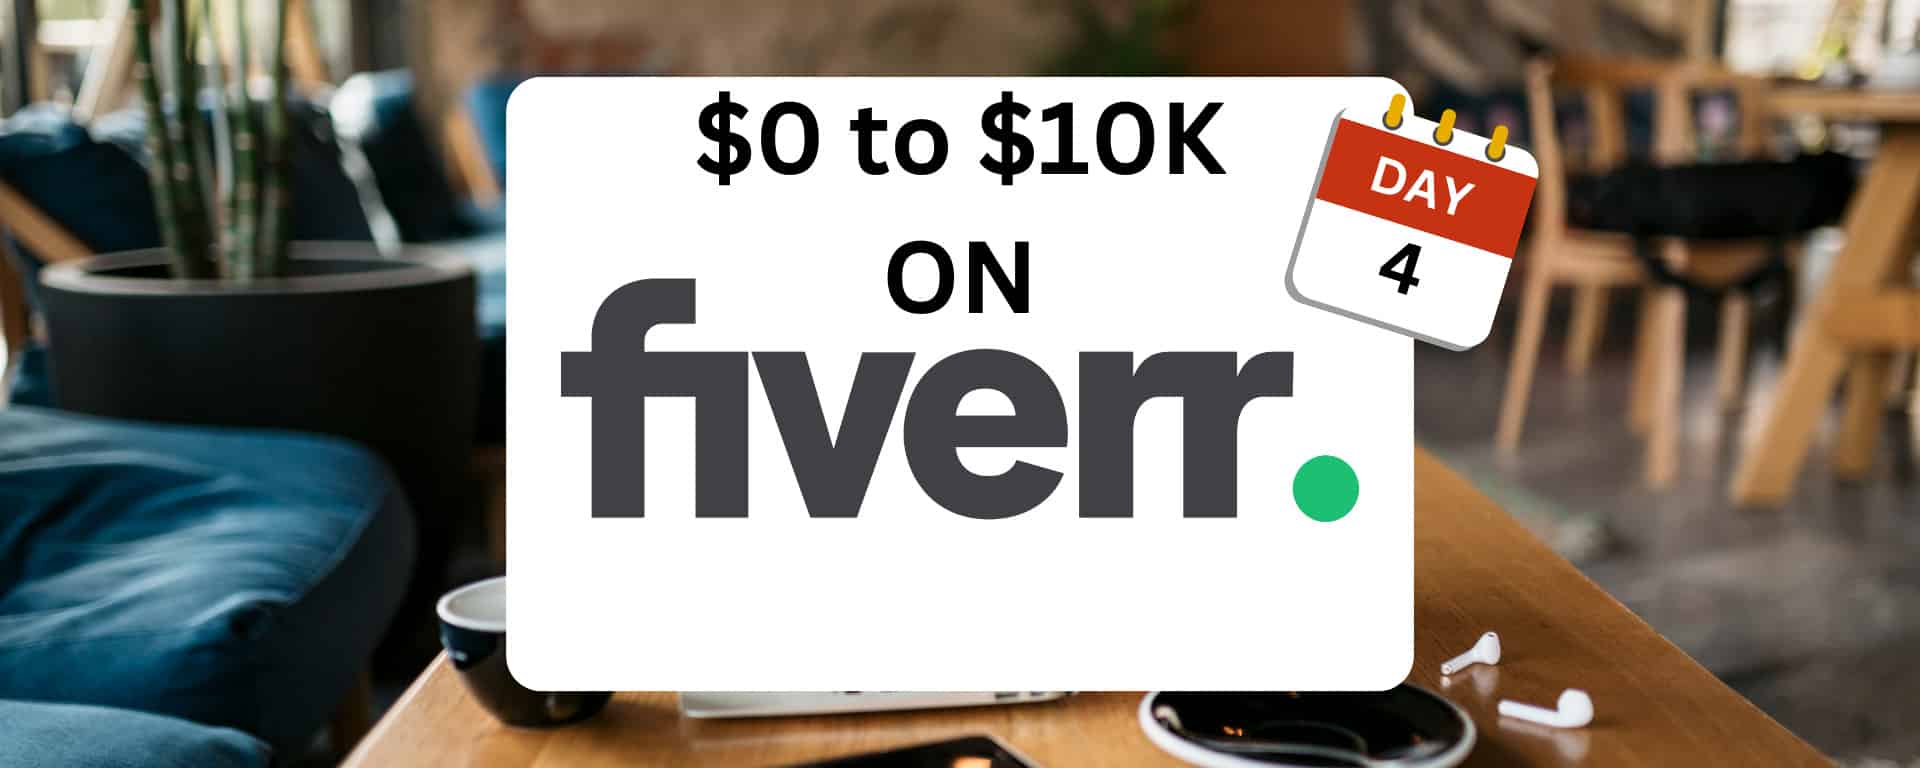 $0 to $10K on Fiverr - Day 4